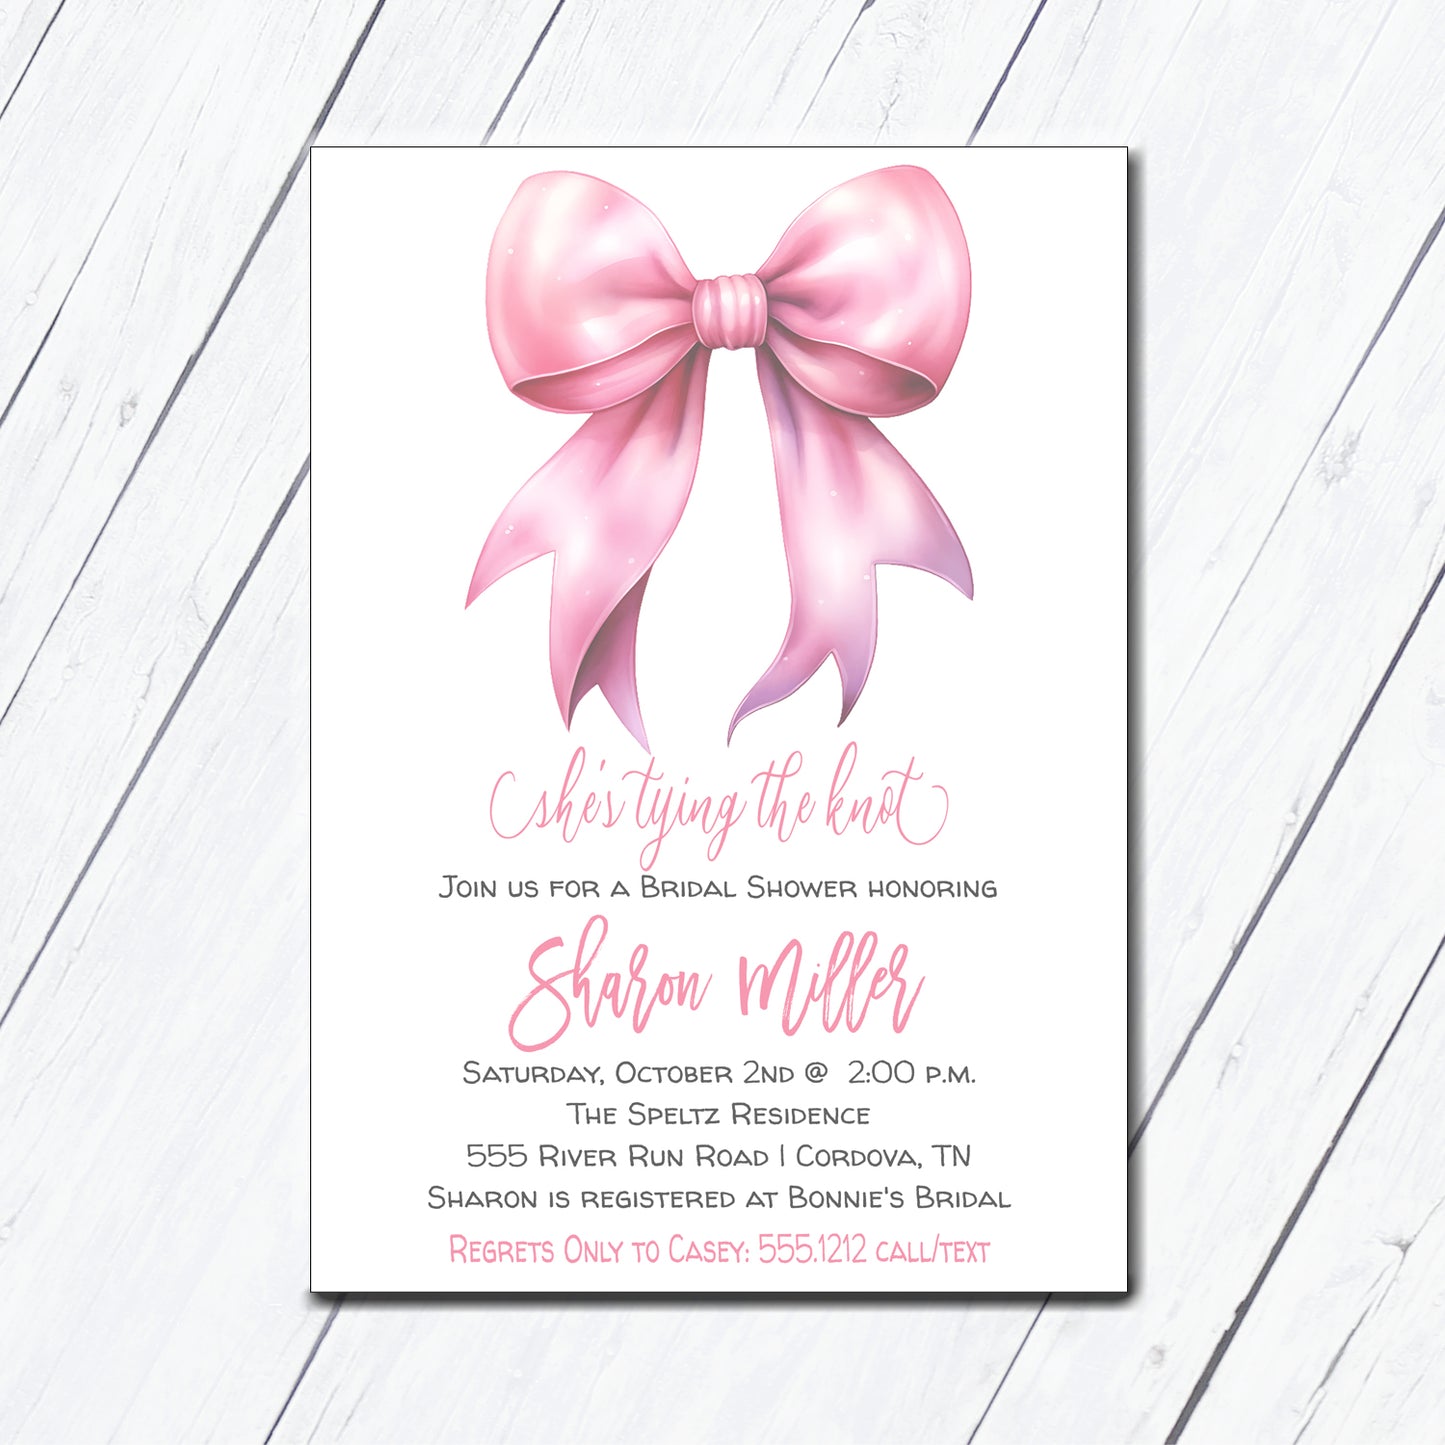 Tying the Knot Bridal Shower Invitation